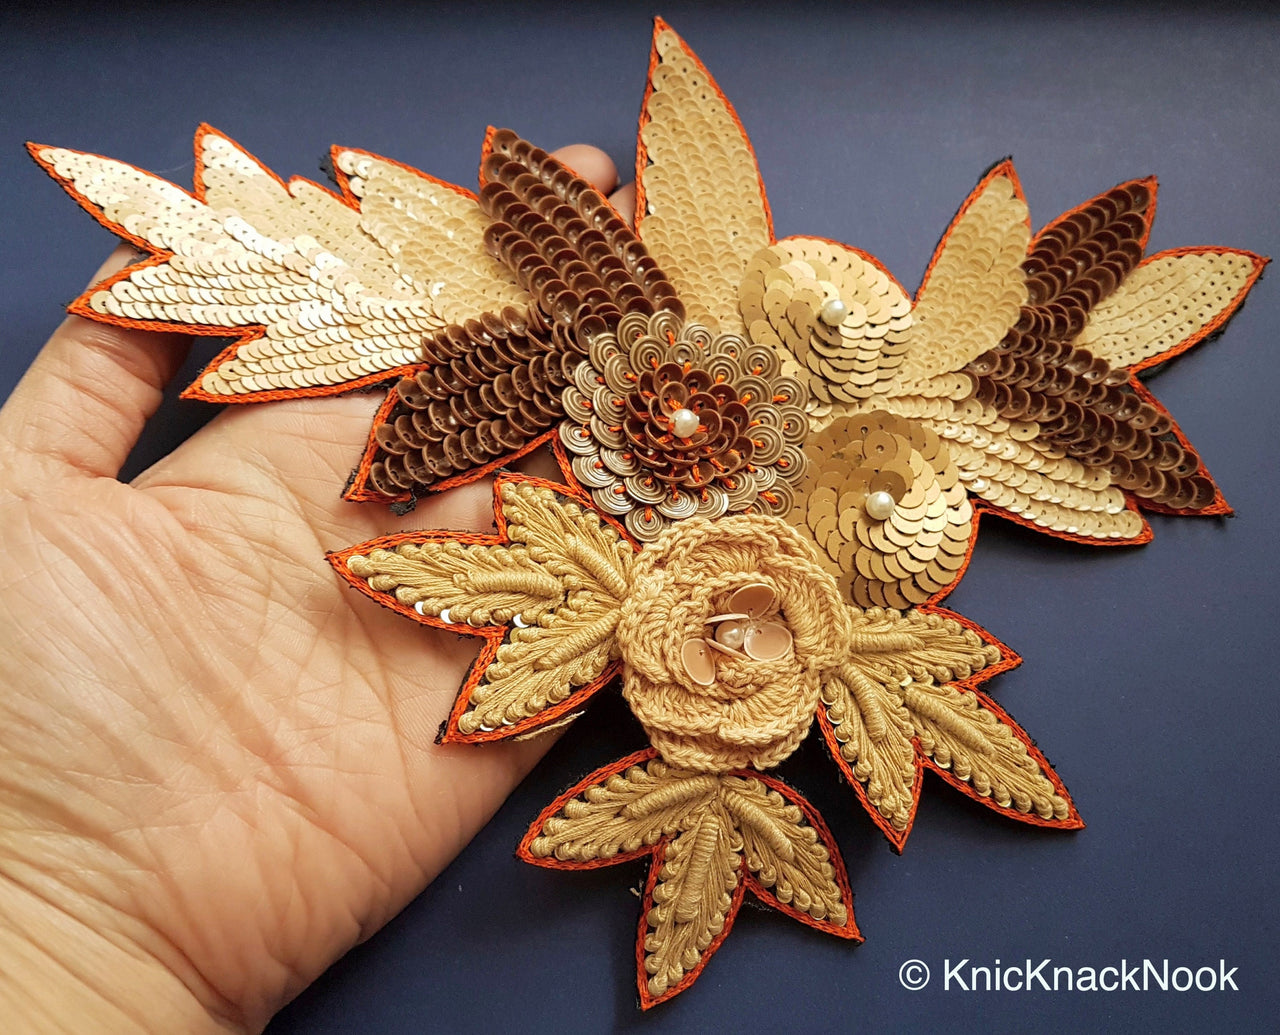 Floral Applique With Beige And Orange / Blue Embroidery, Beige, Brown And Bronze Sequins And White Pearl Beads